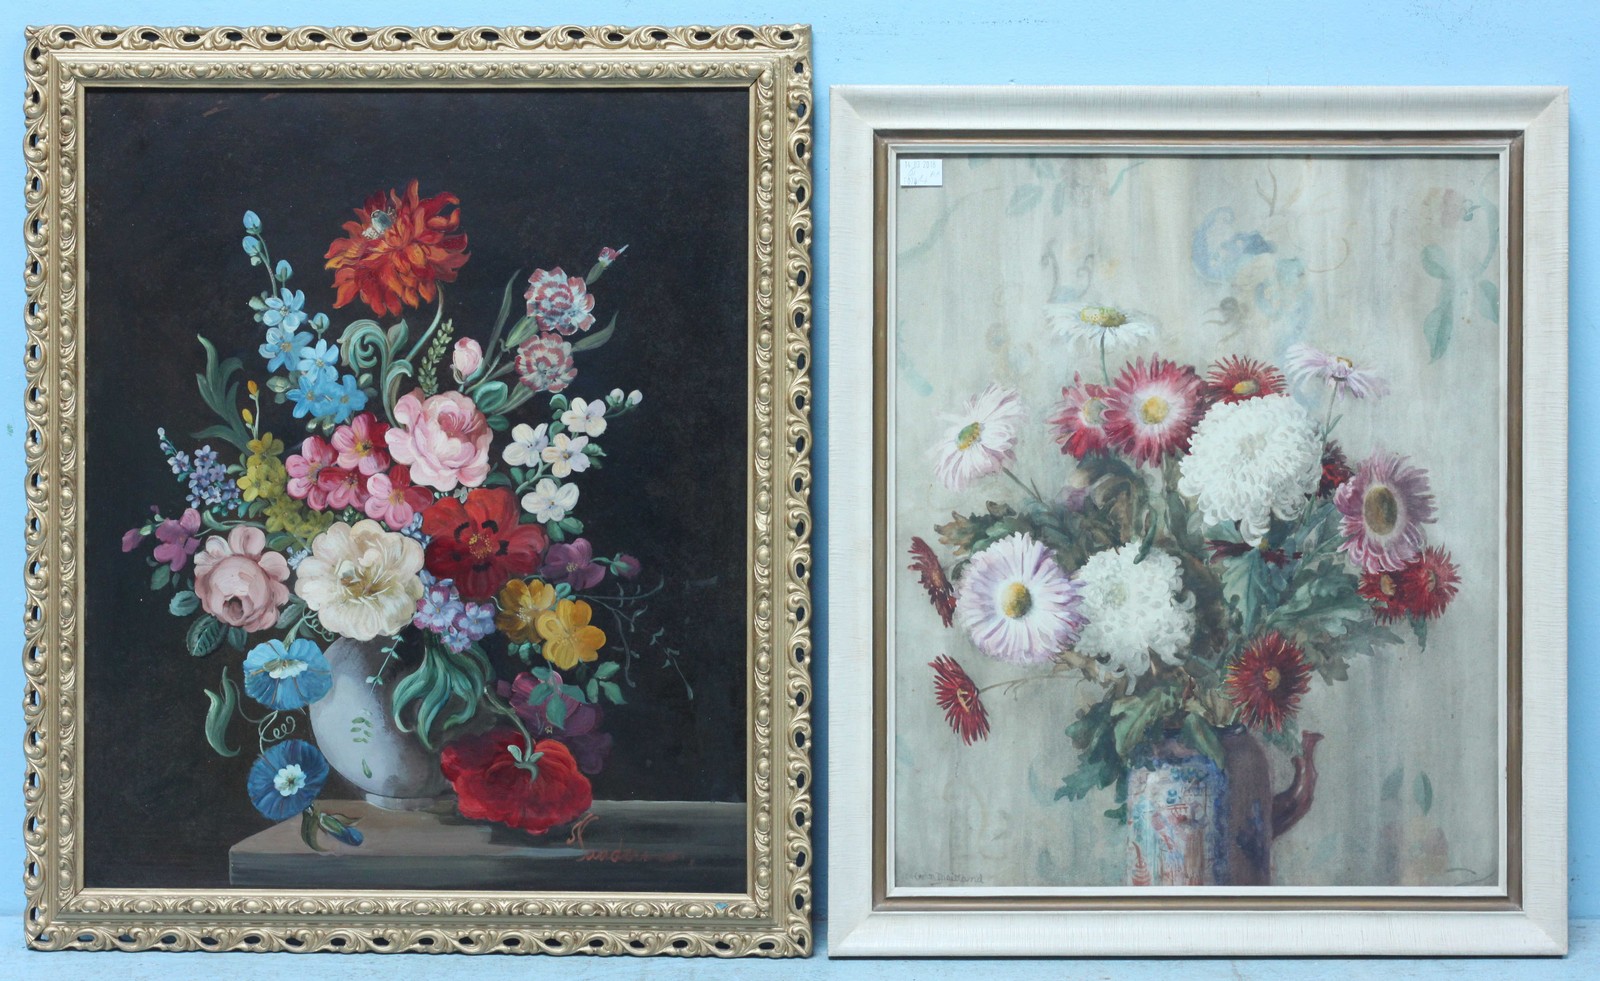 Two still life studies of flowers, one a watercolour study, the other an oil on board. Both